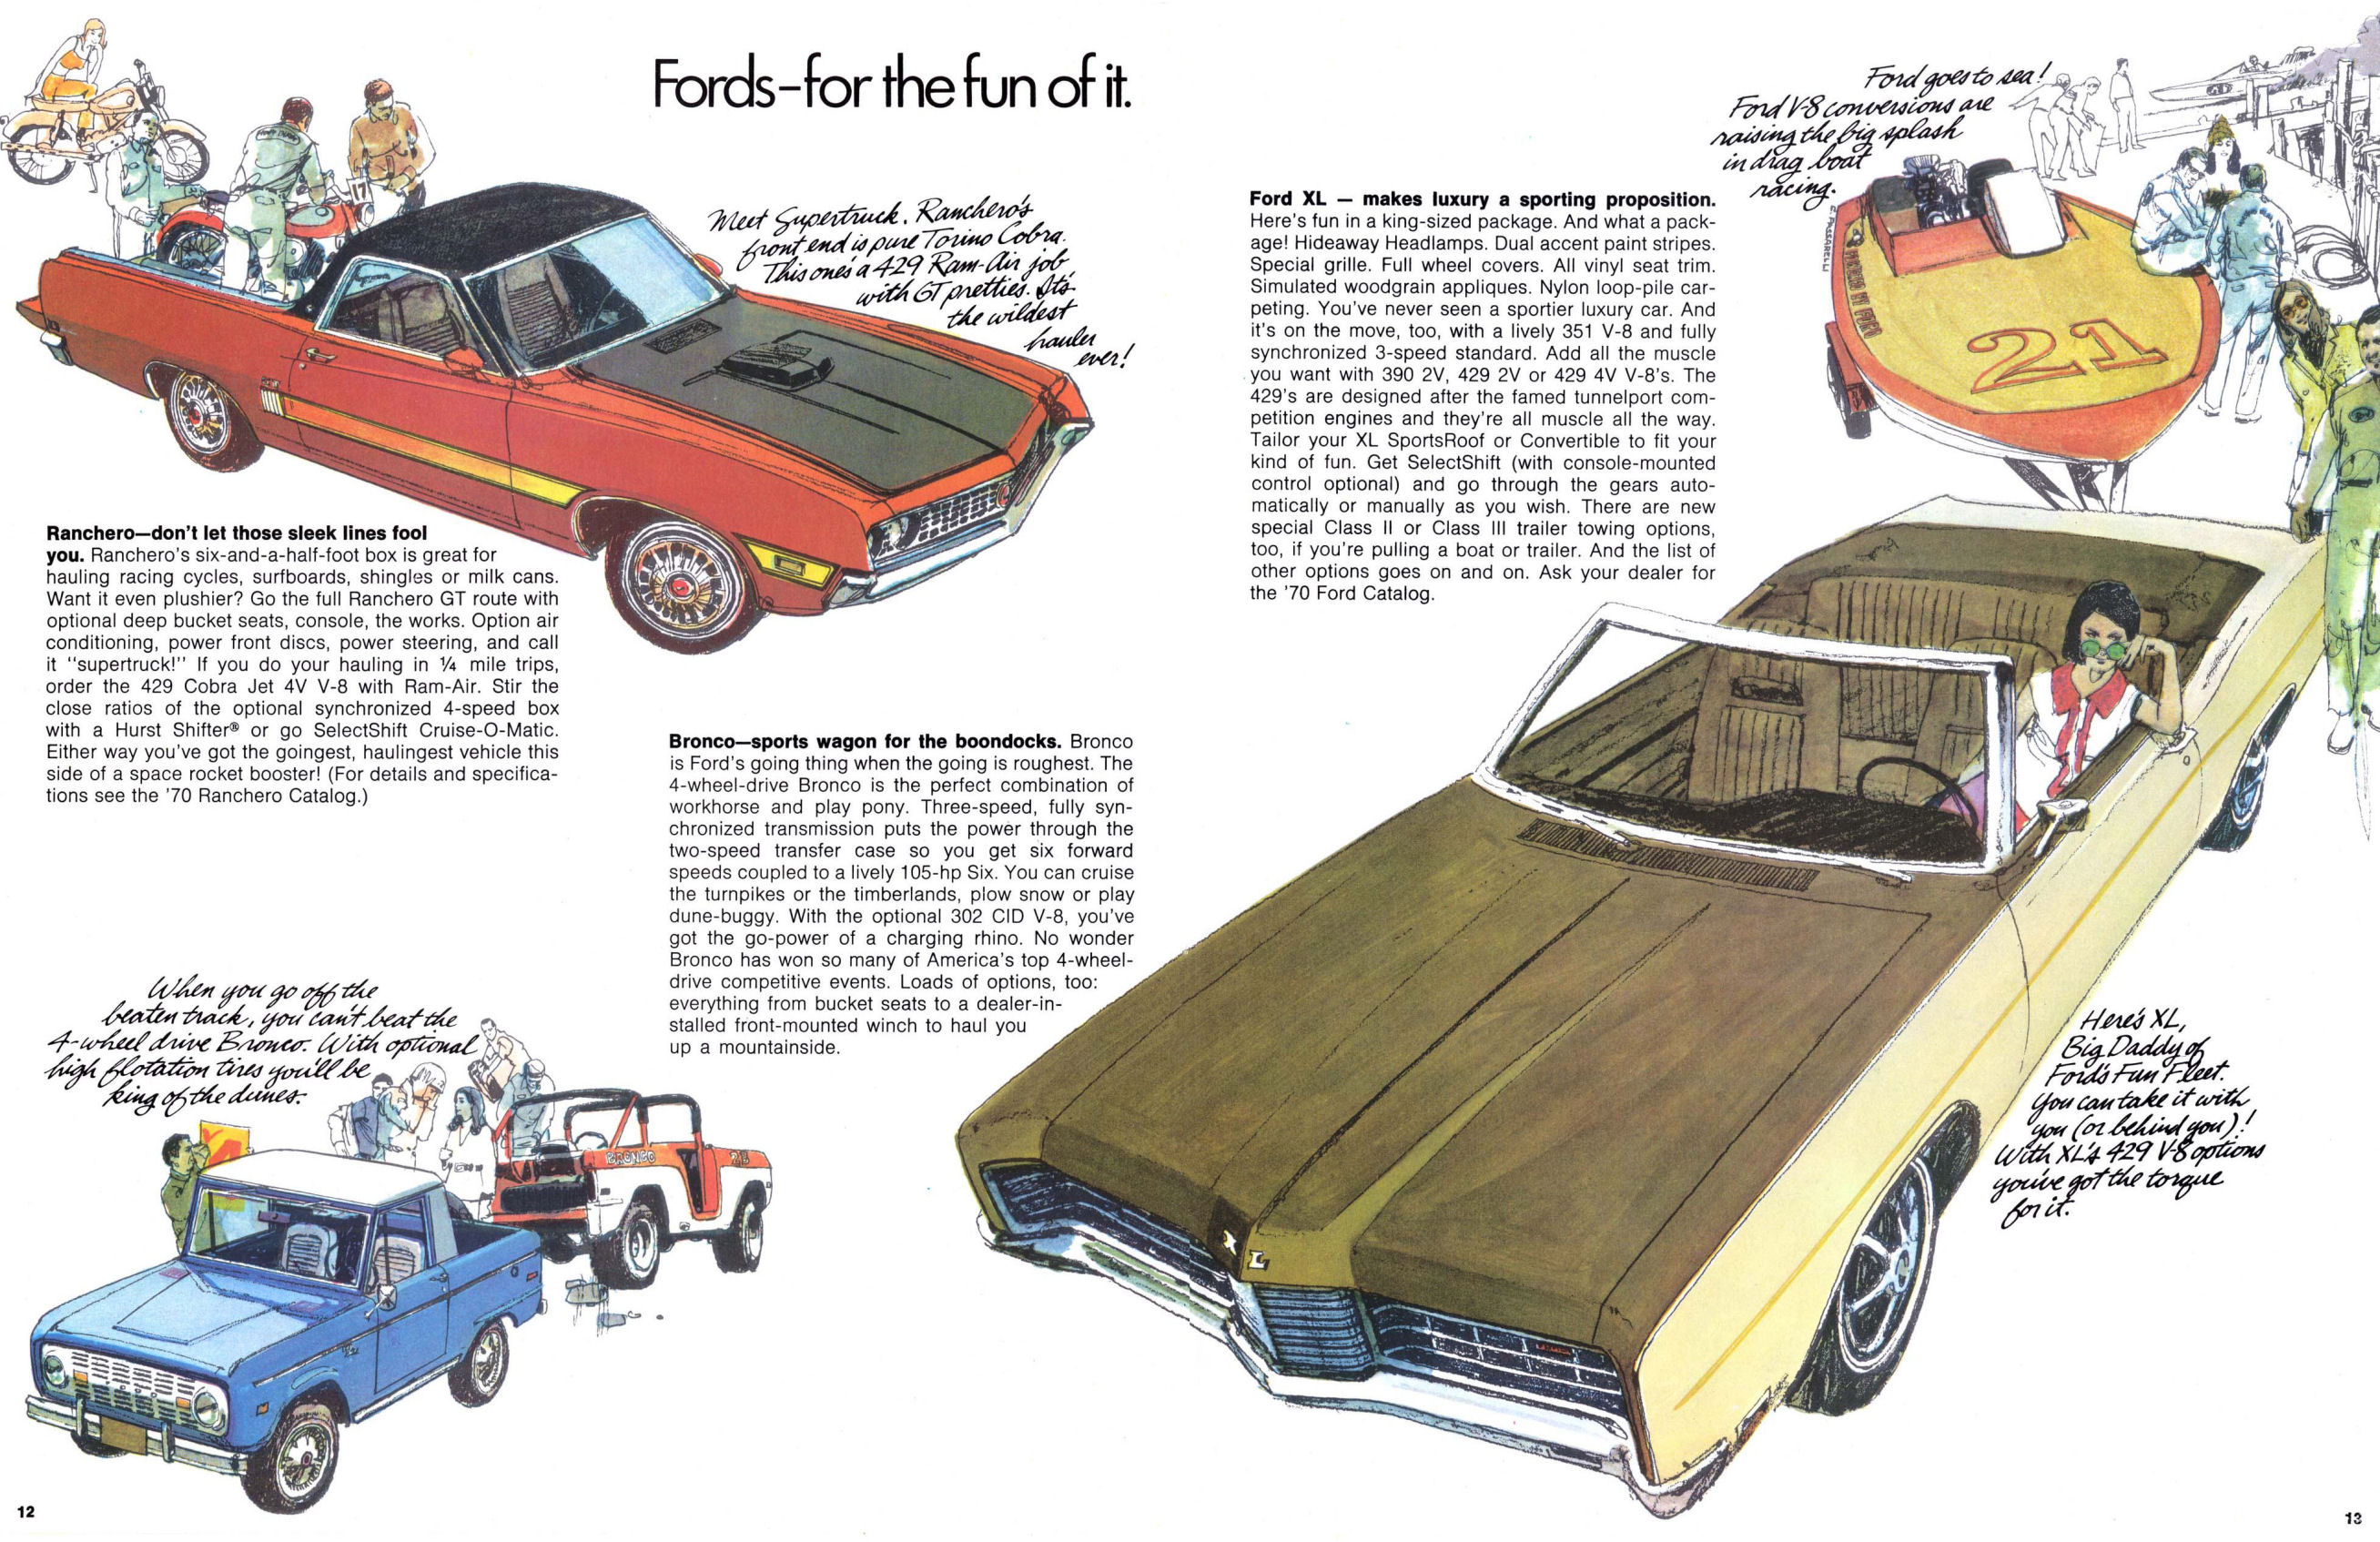 1970_Ford_Performance_Buyers_Digest_Rev-12-13